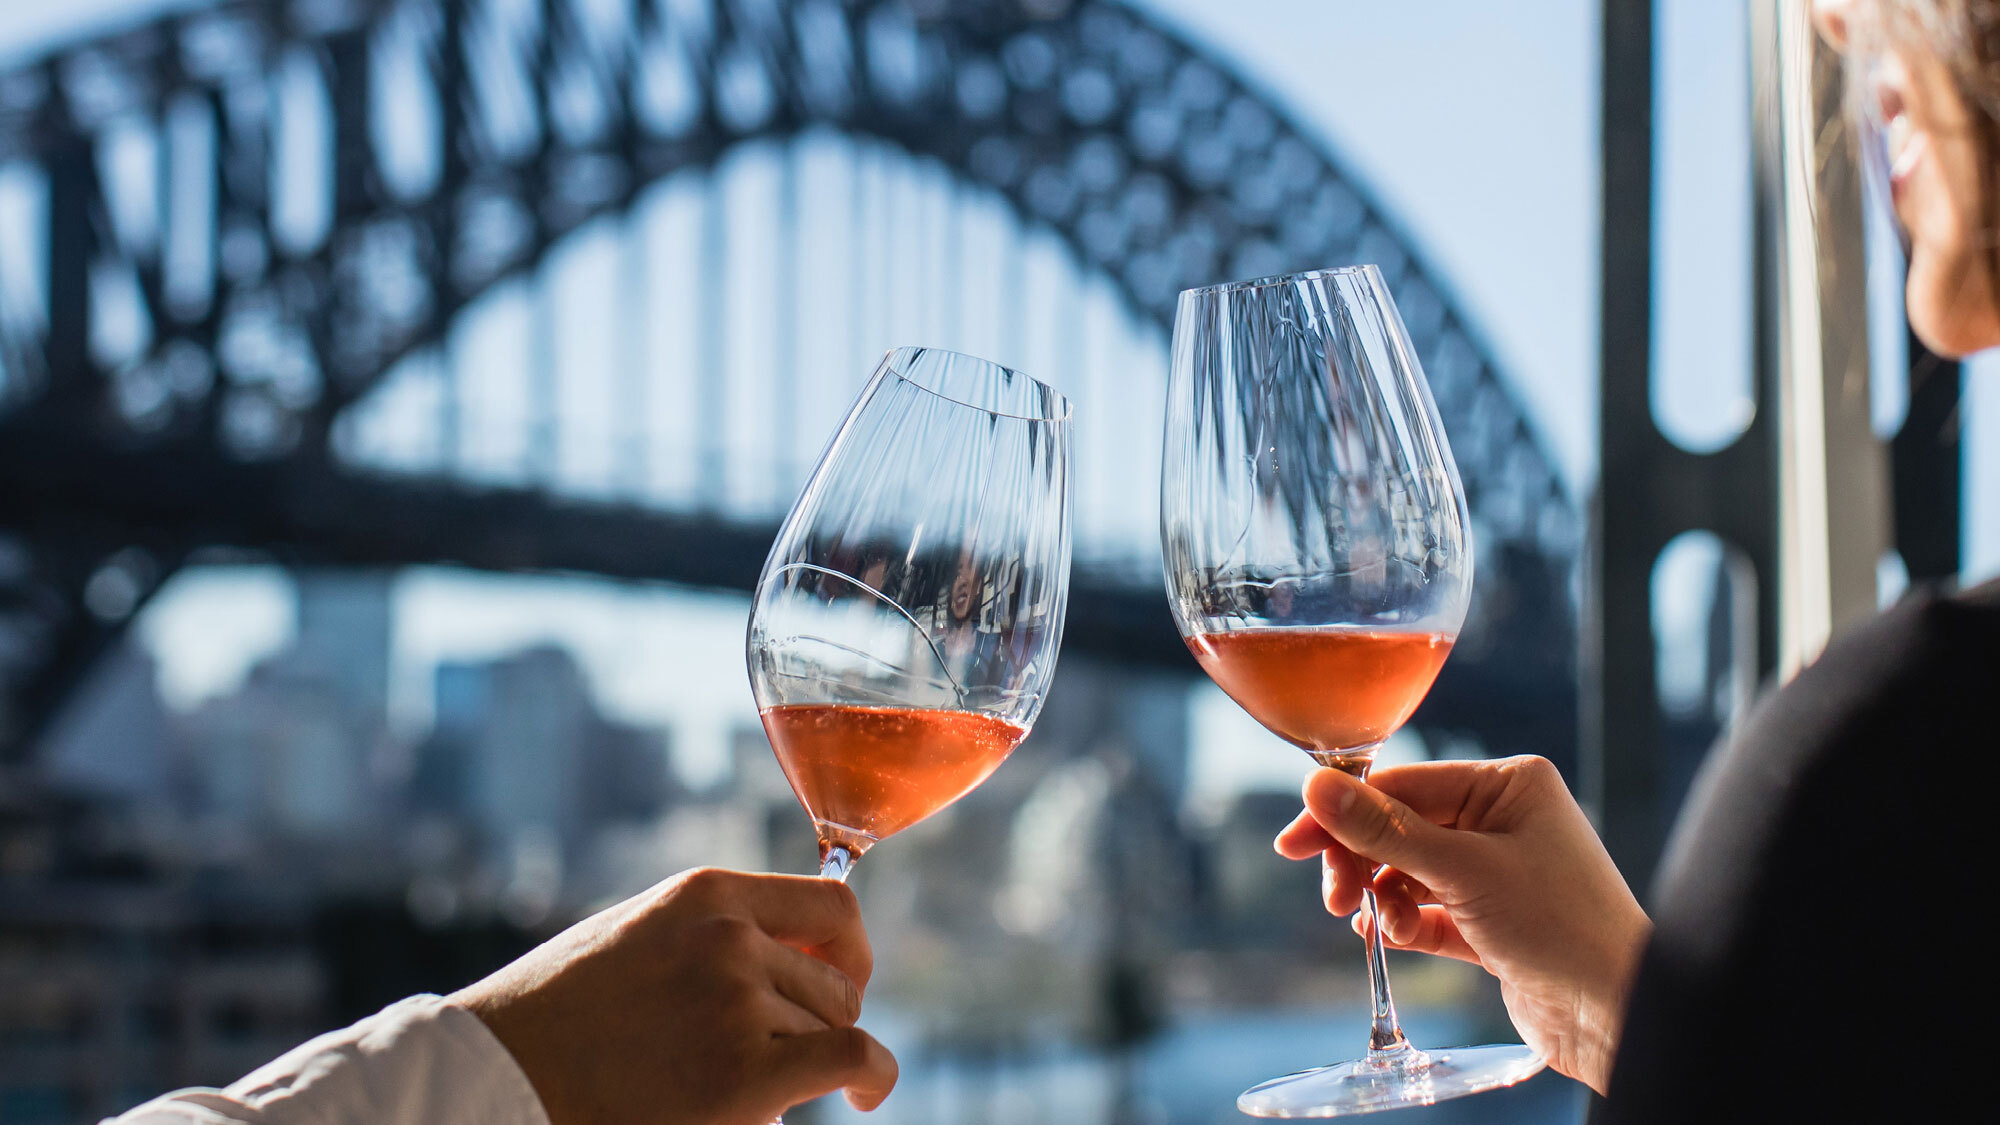 Bridgeclimb Sydney romance packages and products